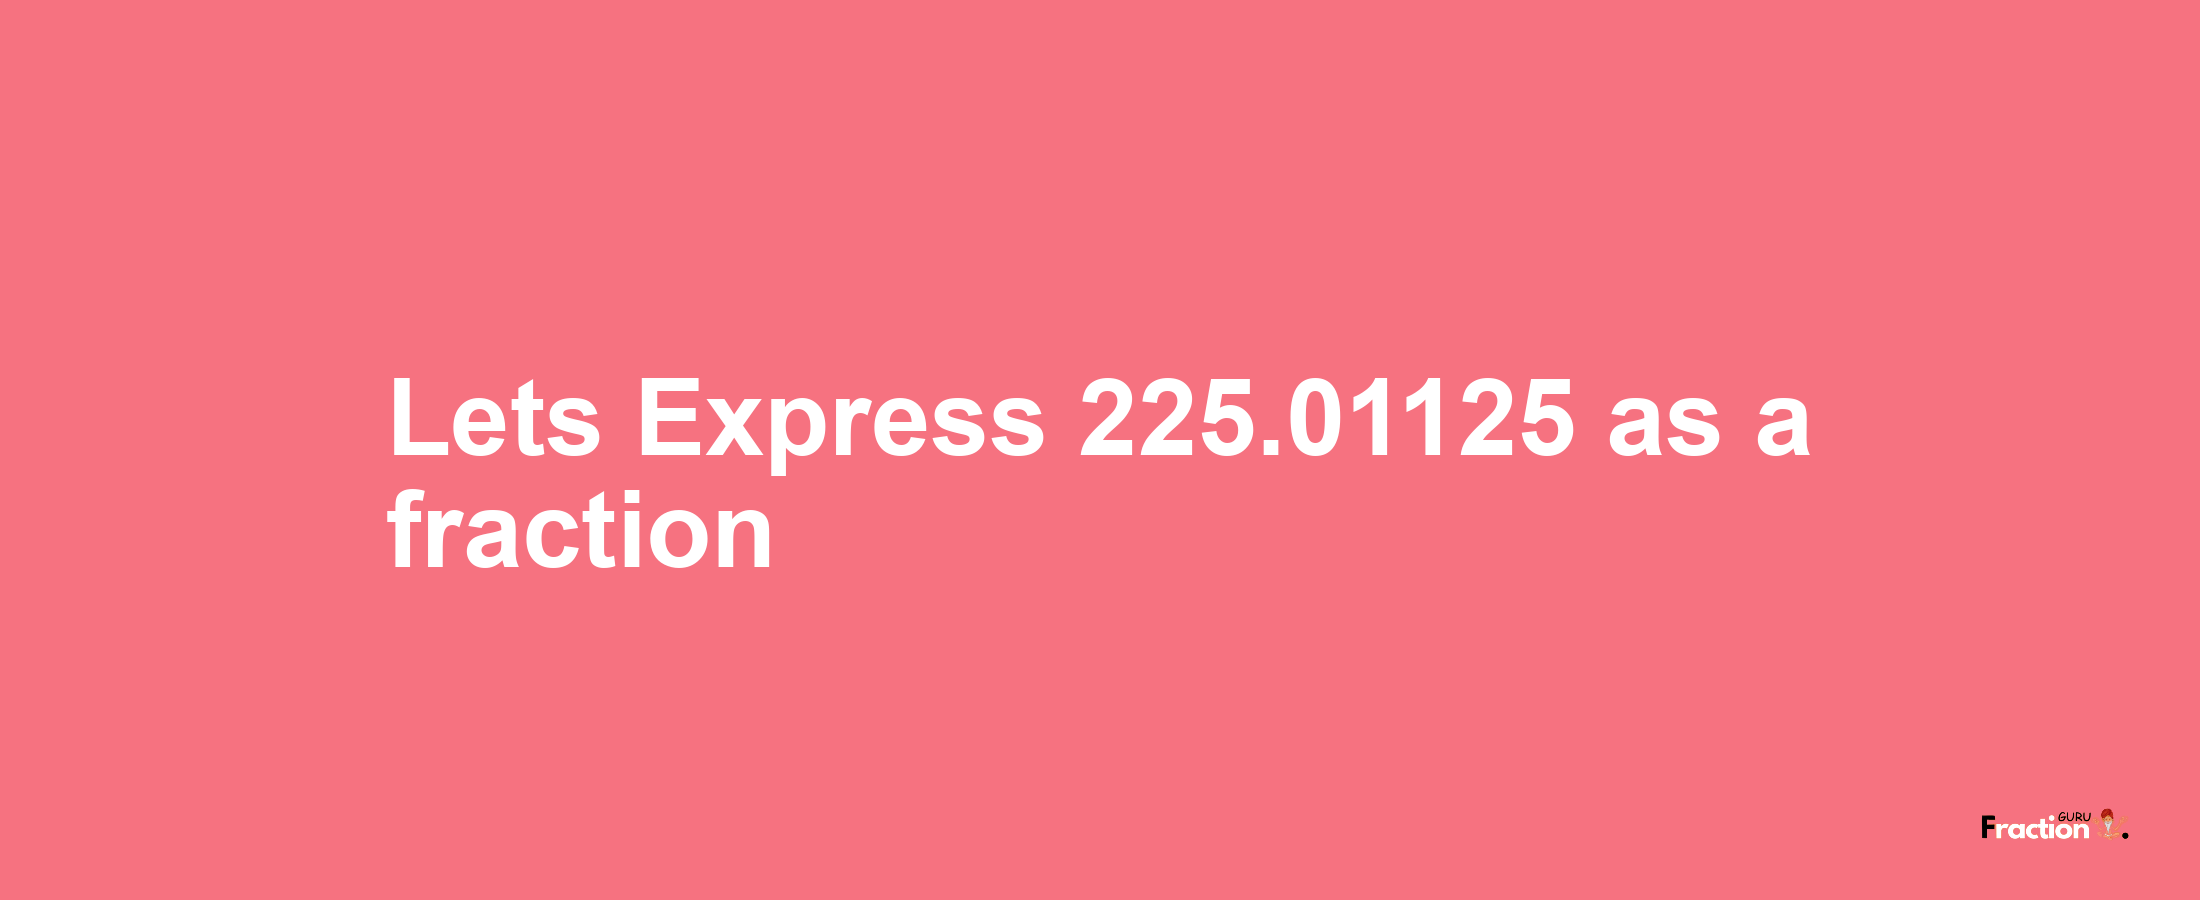 Lets Express 225.01125 as afraction